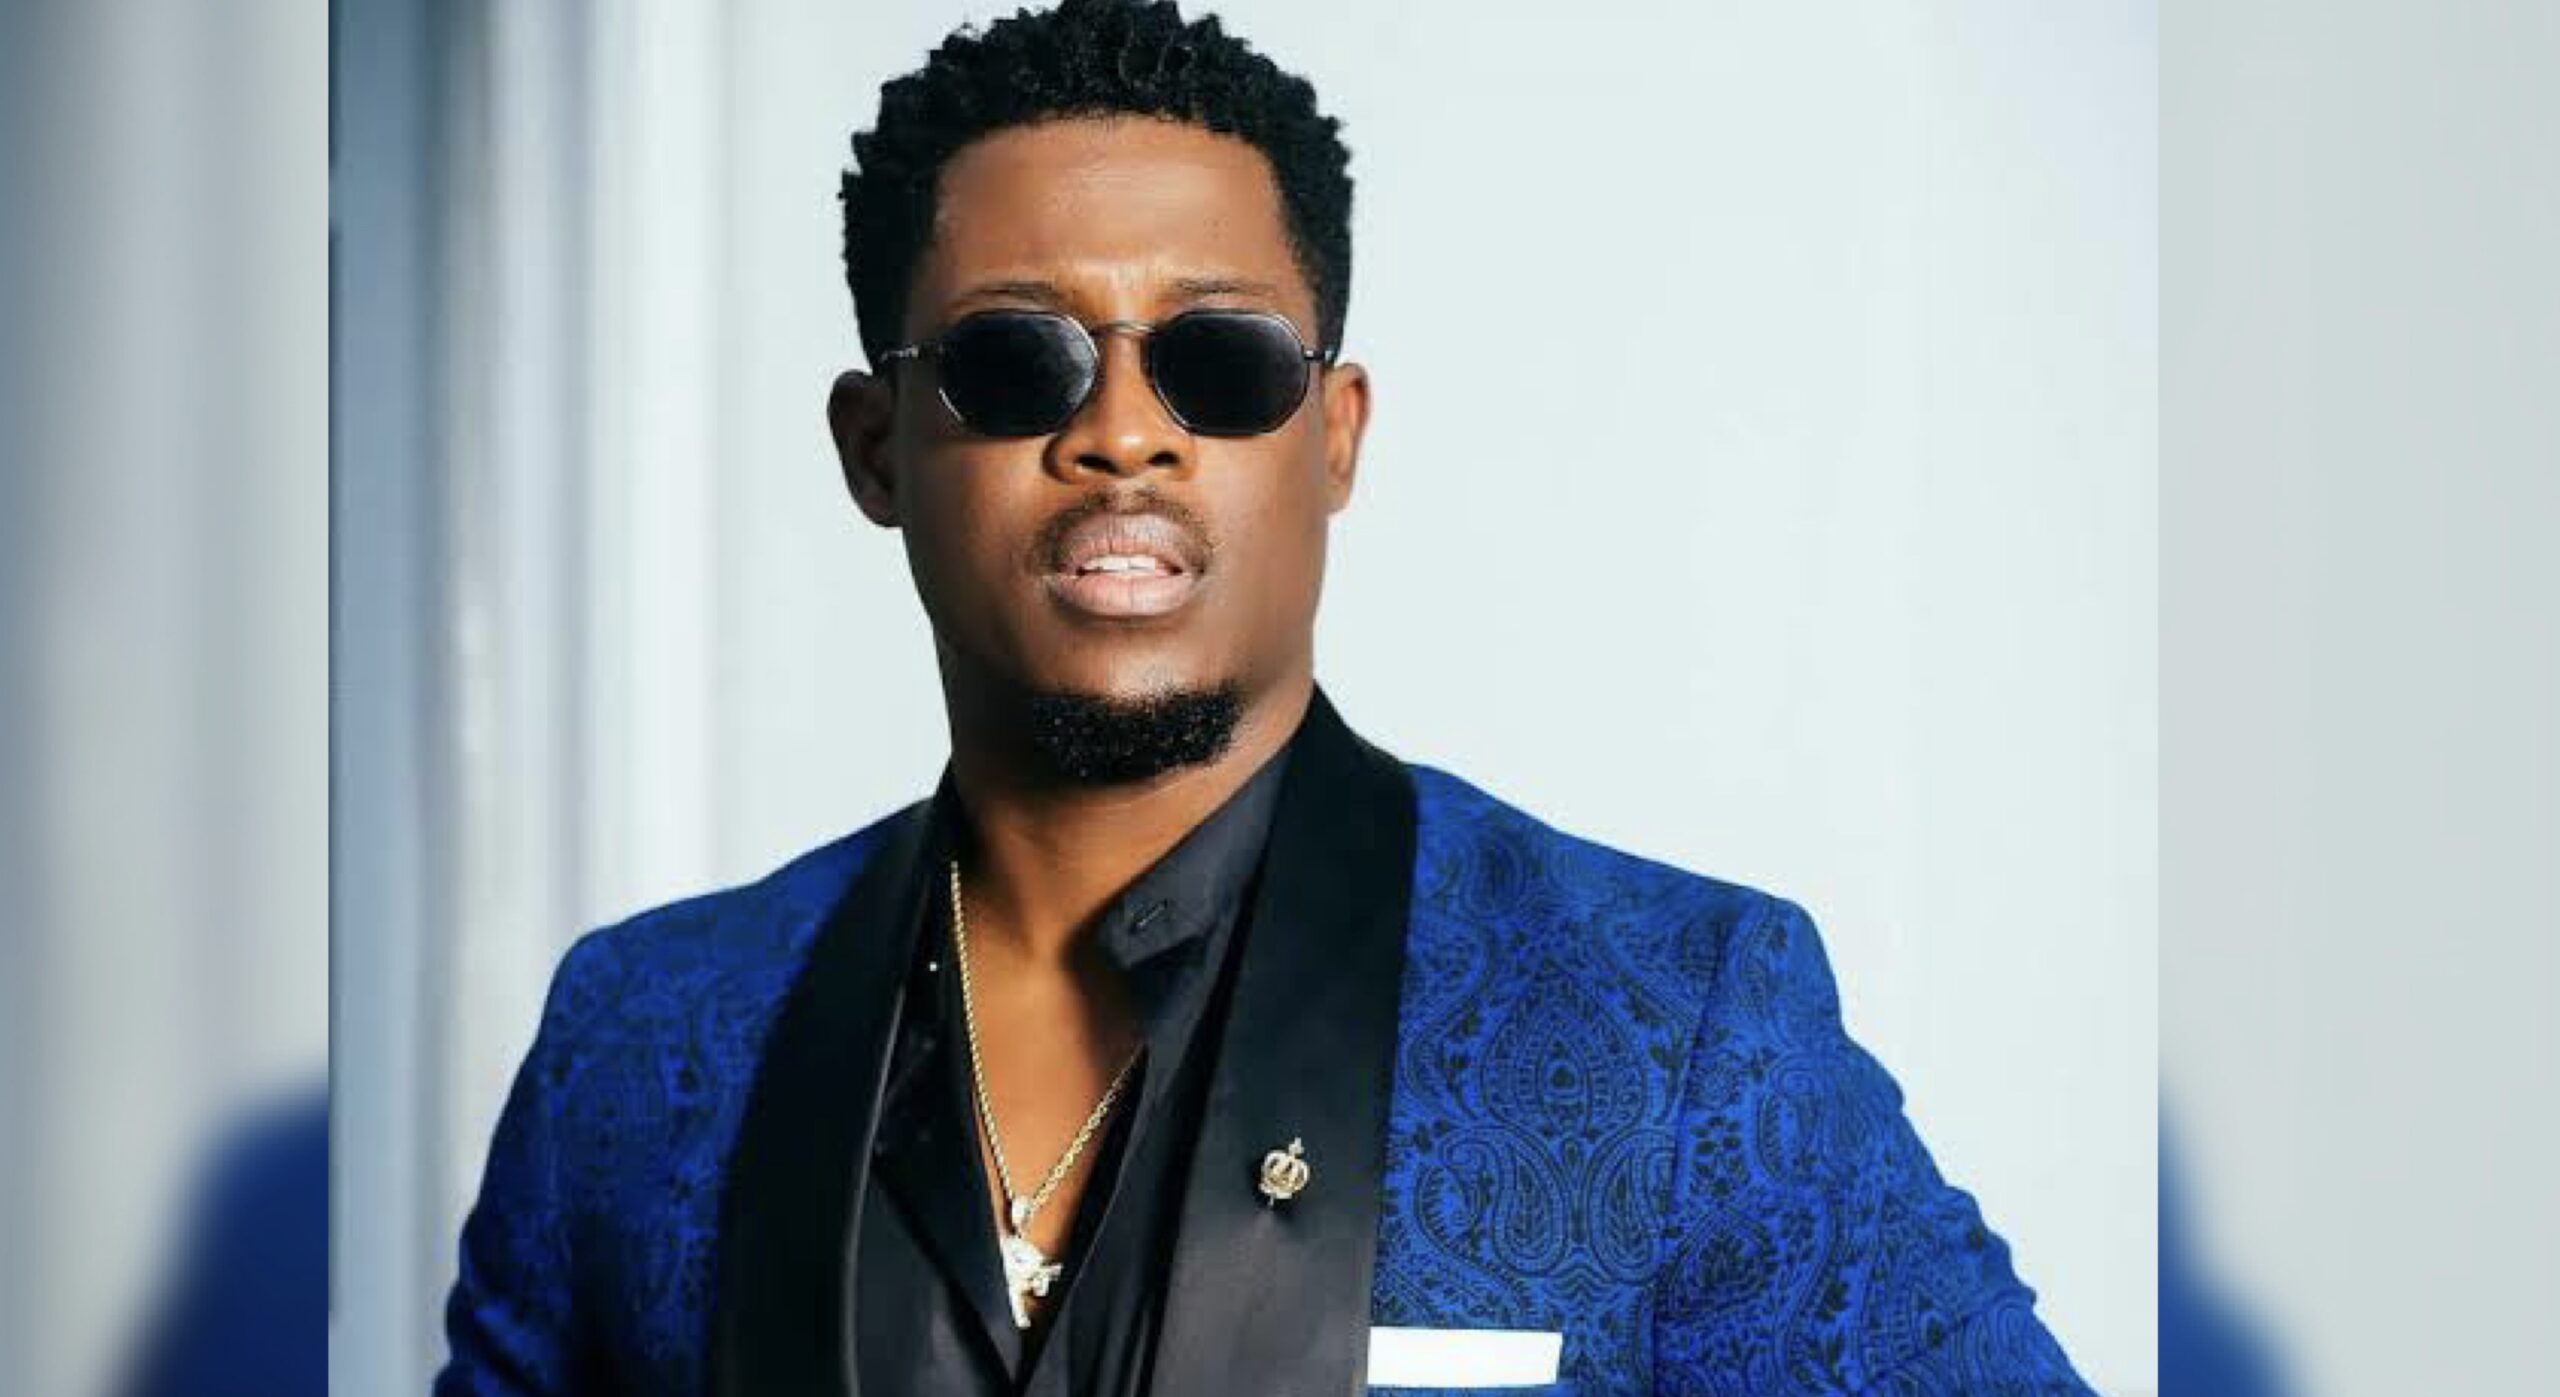 BBNaija All Stars: It was misogynistic – Seyi apologizes over people's  daughters comment | 084Hype